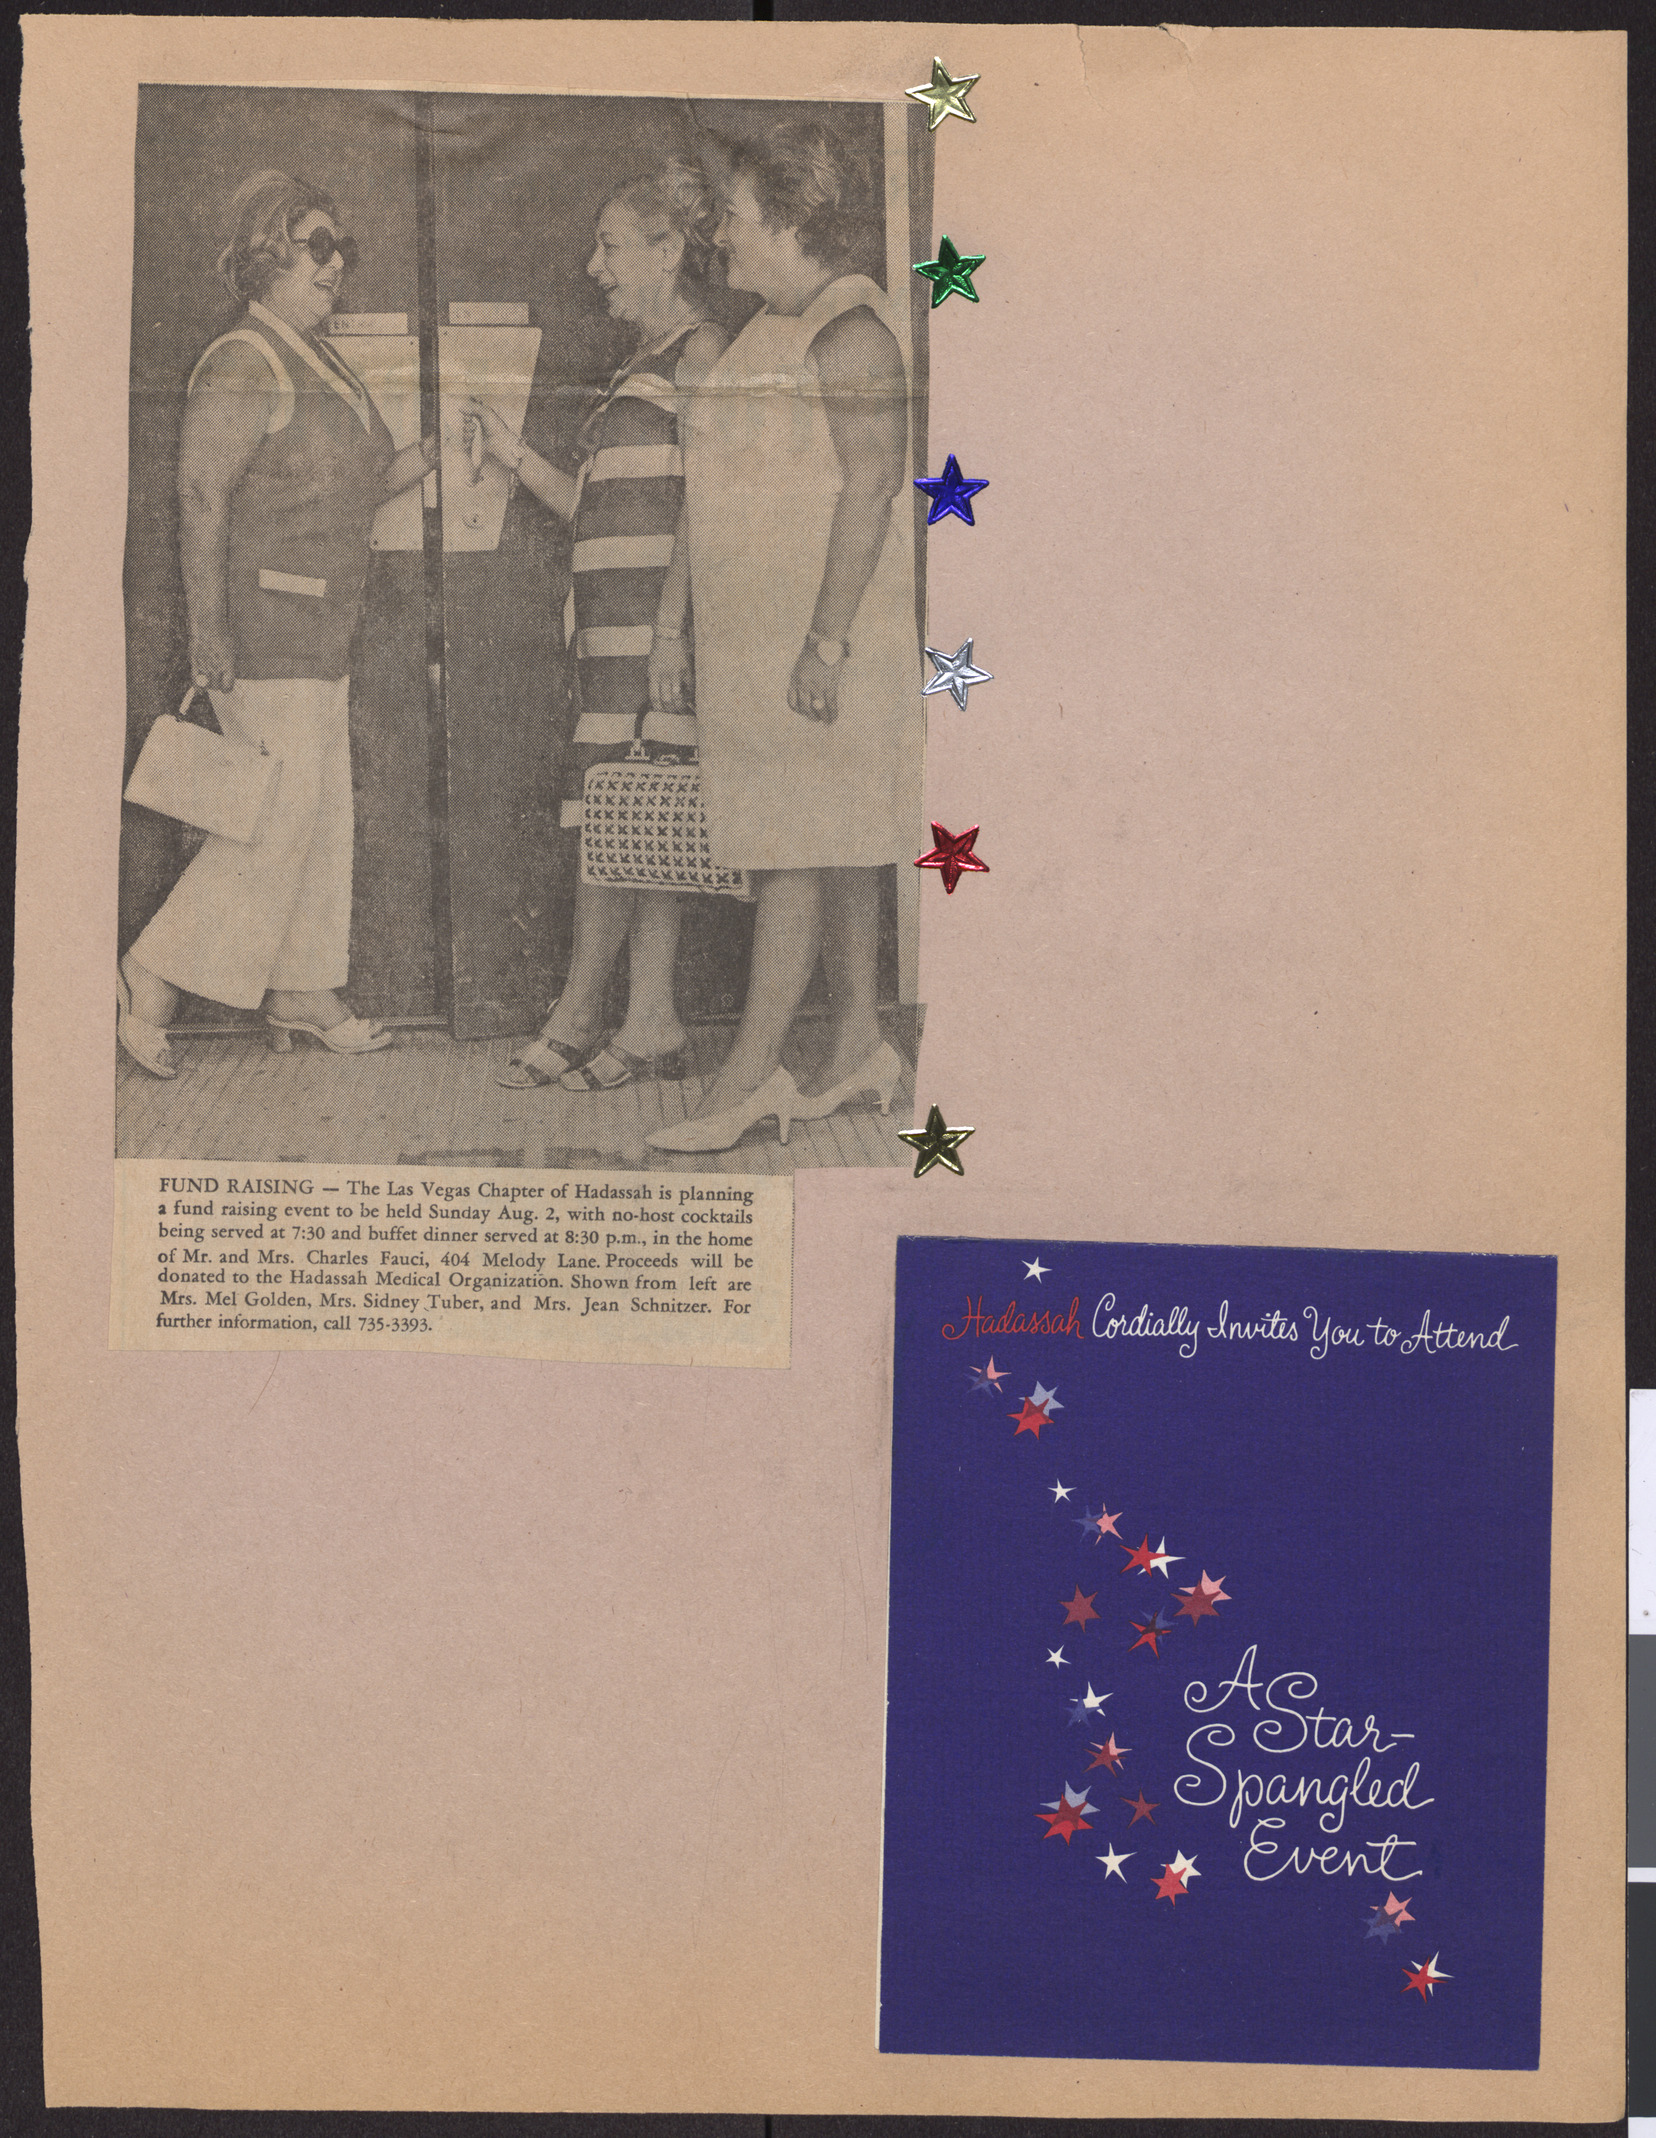 Newspaper clipping, Fund Raising, publication and date unknown, and invitation card for Hadassah star-spangled event